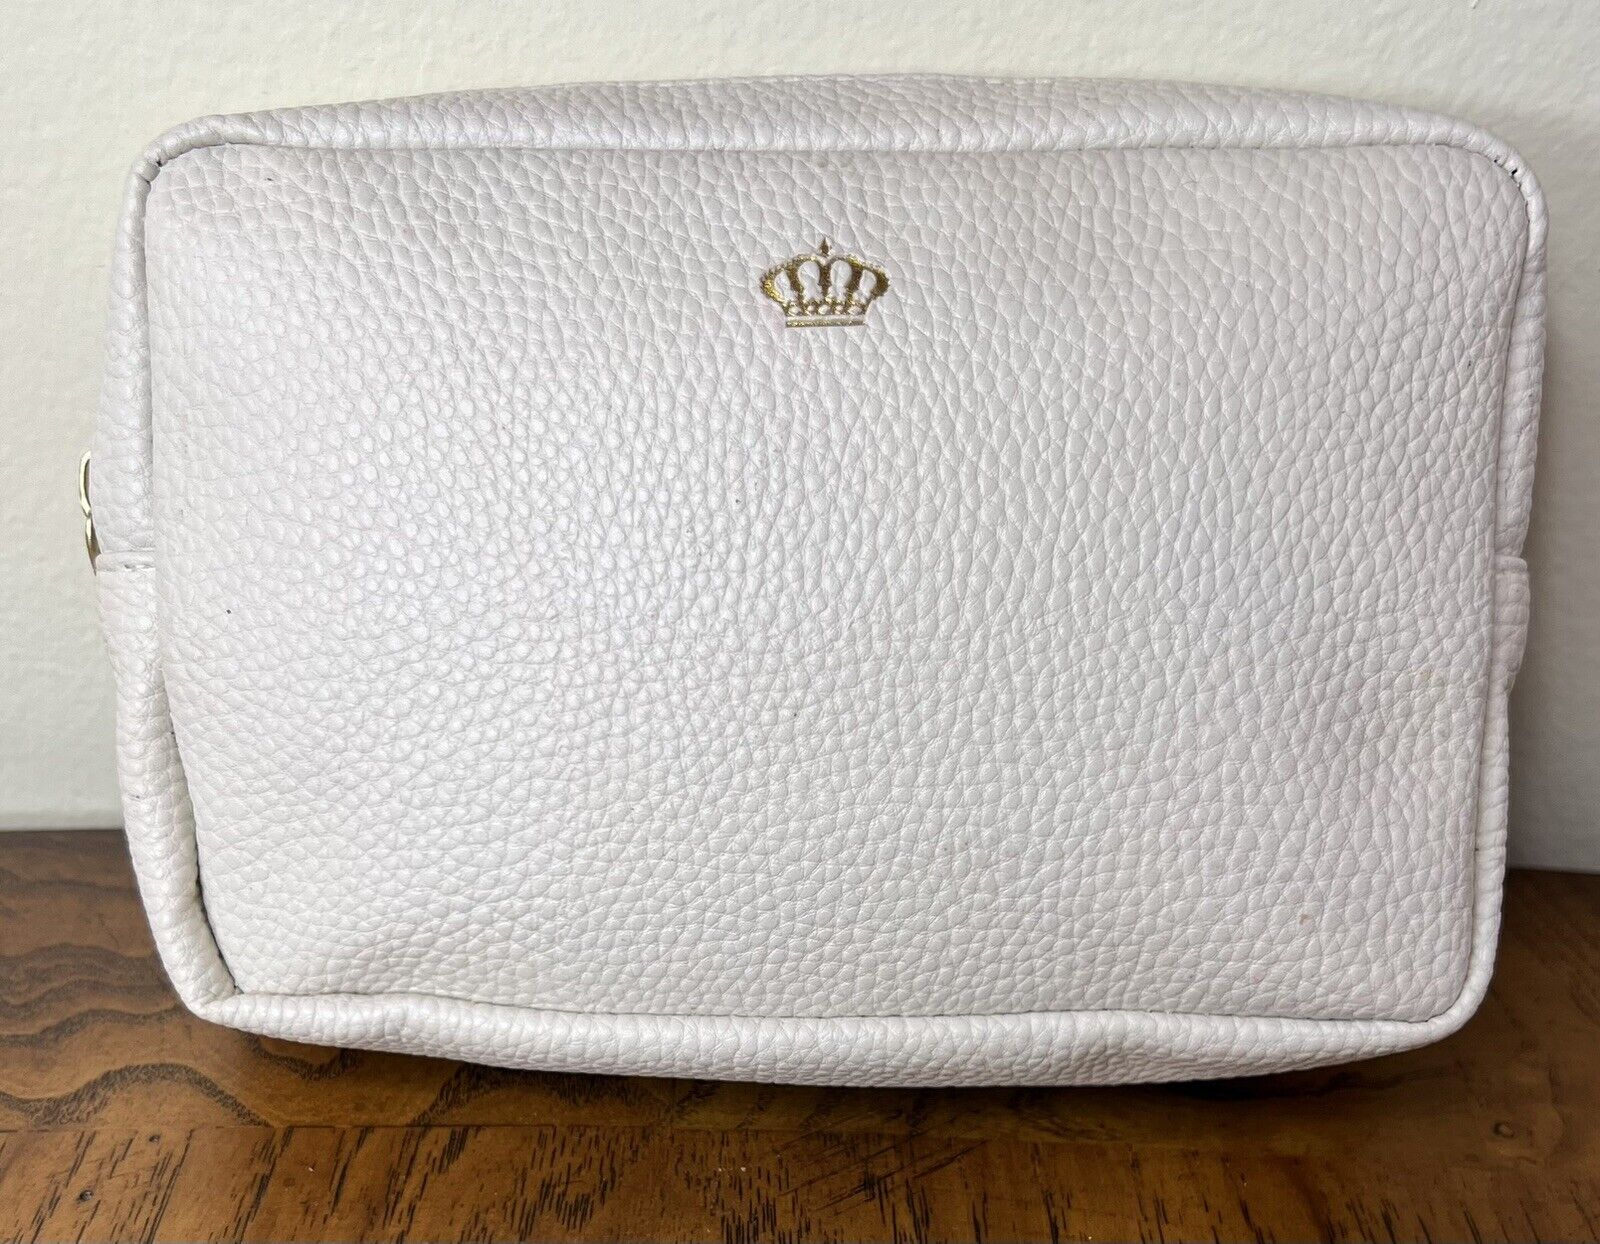 Royal Jordanian Business Crown Class Cream Leather Look Amenity Bag Only